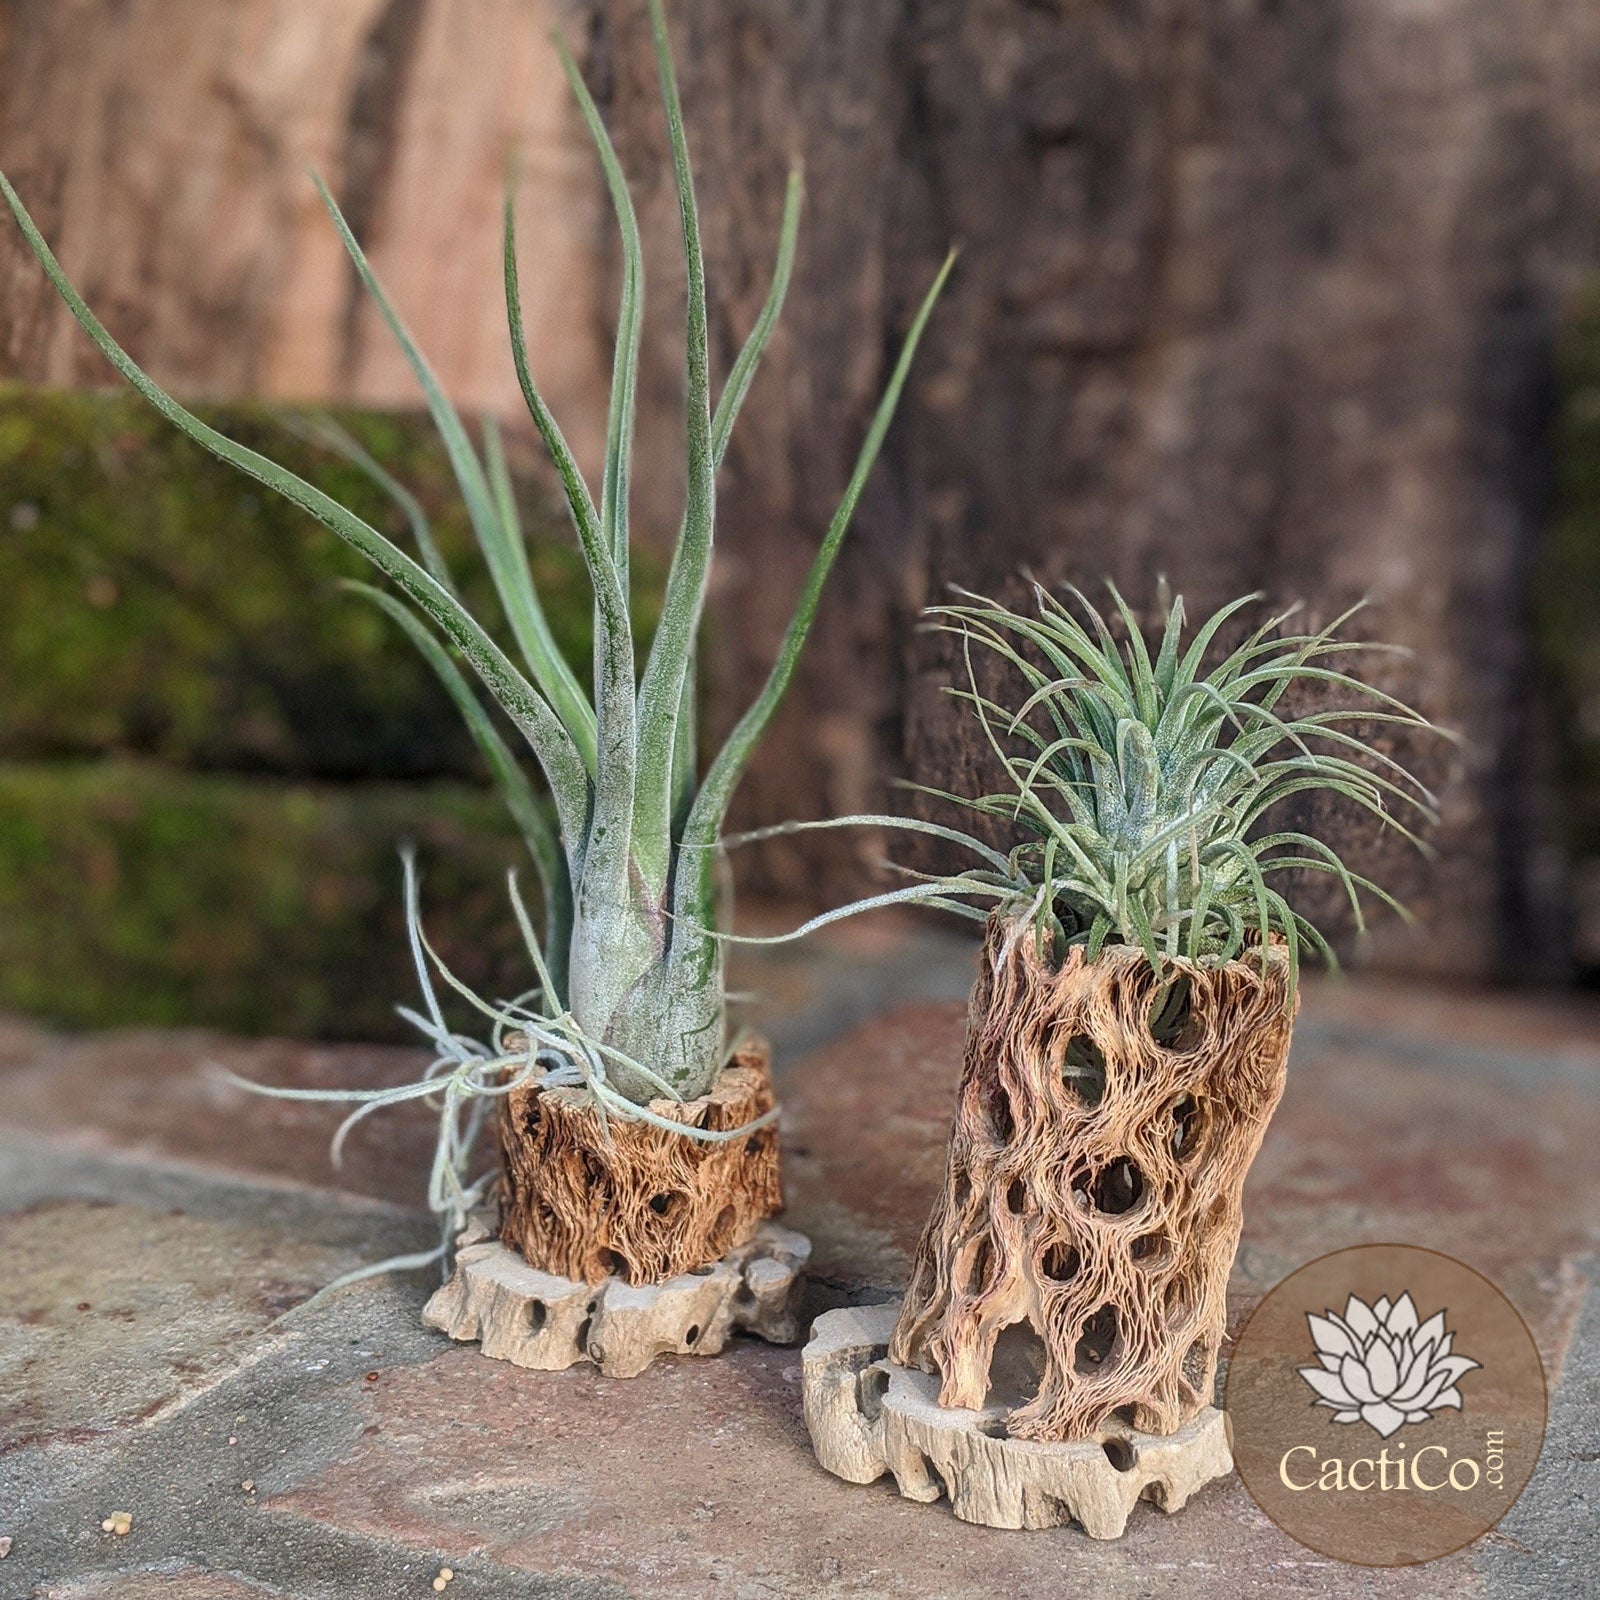 Tillandsia Spanish Moss and Ionantha Combo for Sale